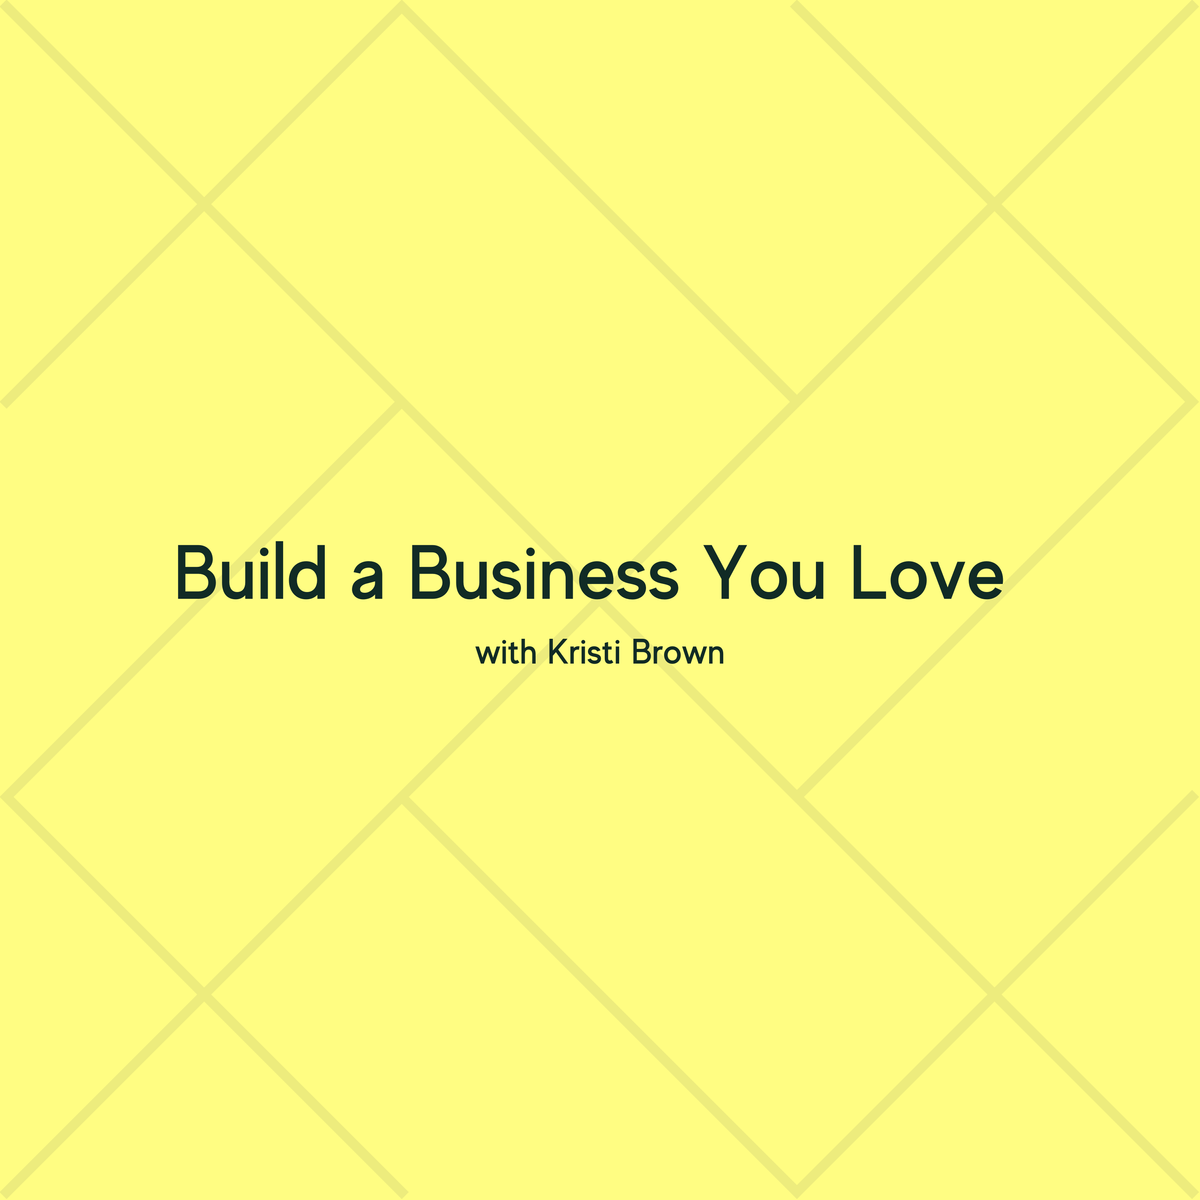 Build a Business You Love with Kristi Brown